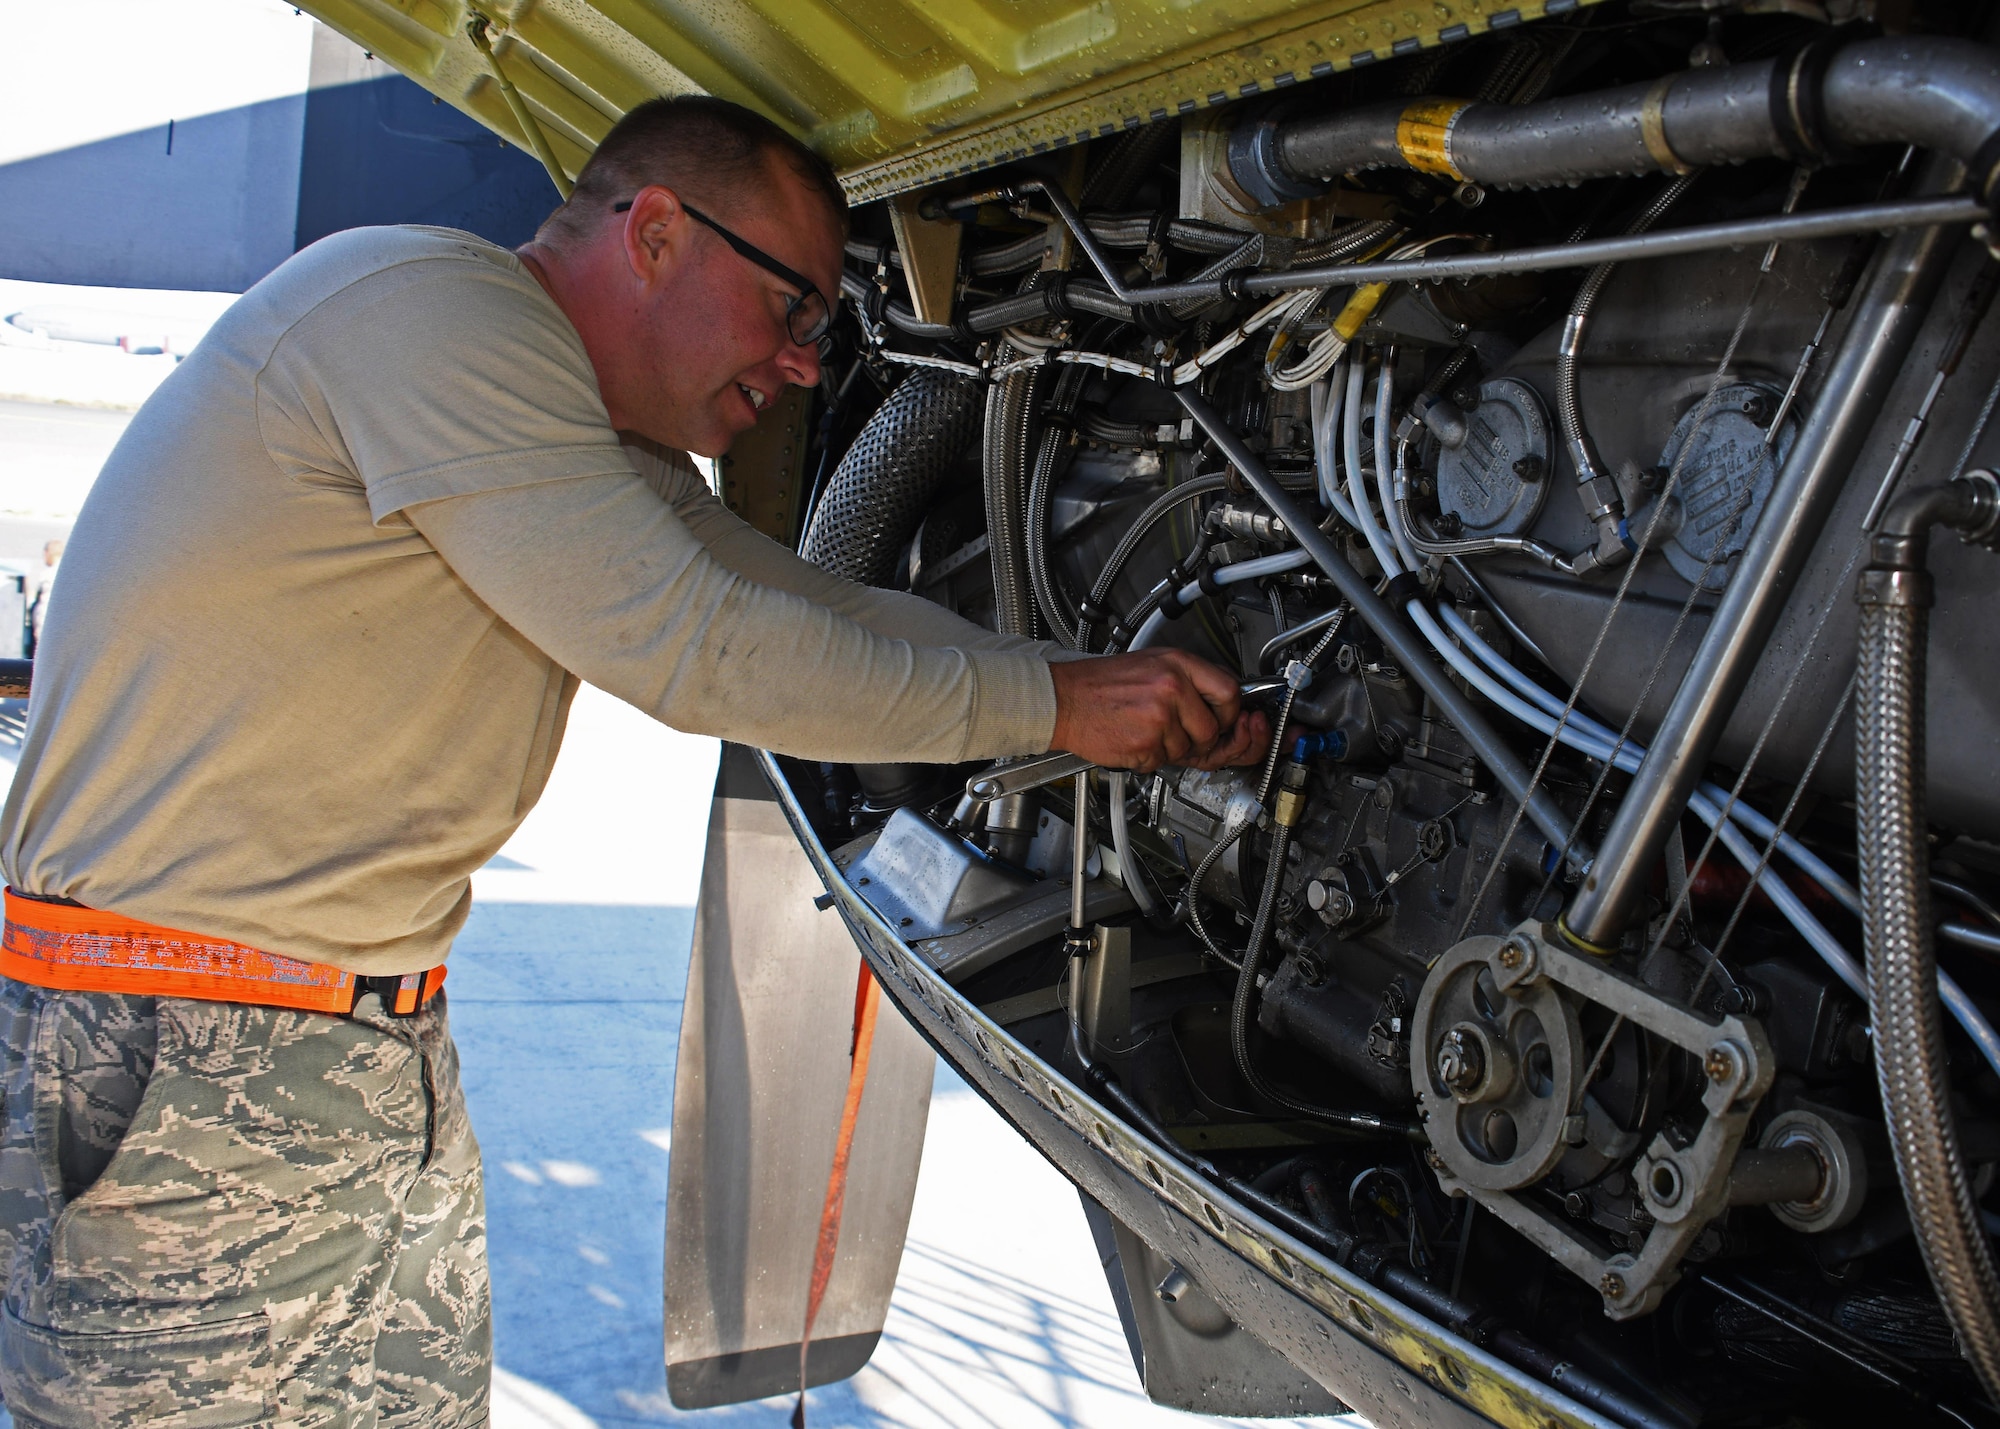 U.S. Air Force Master Sgt. Shawn Froehling, an engine mechanic with the 379th Expeditionary Aircraft Maintenance Squadron, 746th Expeditionary Aircraft Maintenance Unit, conducts a 30-day desert inspection on the engine of a C-130 Hercules at Al Udeid Air Base, Qatar, Dec. 30, 2016. Due to constant exposure to sand from the desert, an inspection is required every 30 days on each C-130 to ensure that there is no buildup of dust or other debris in the engines. (U.S. Air Force photo by Senior Airman Miles Wilson)